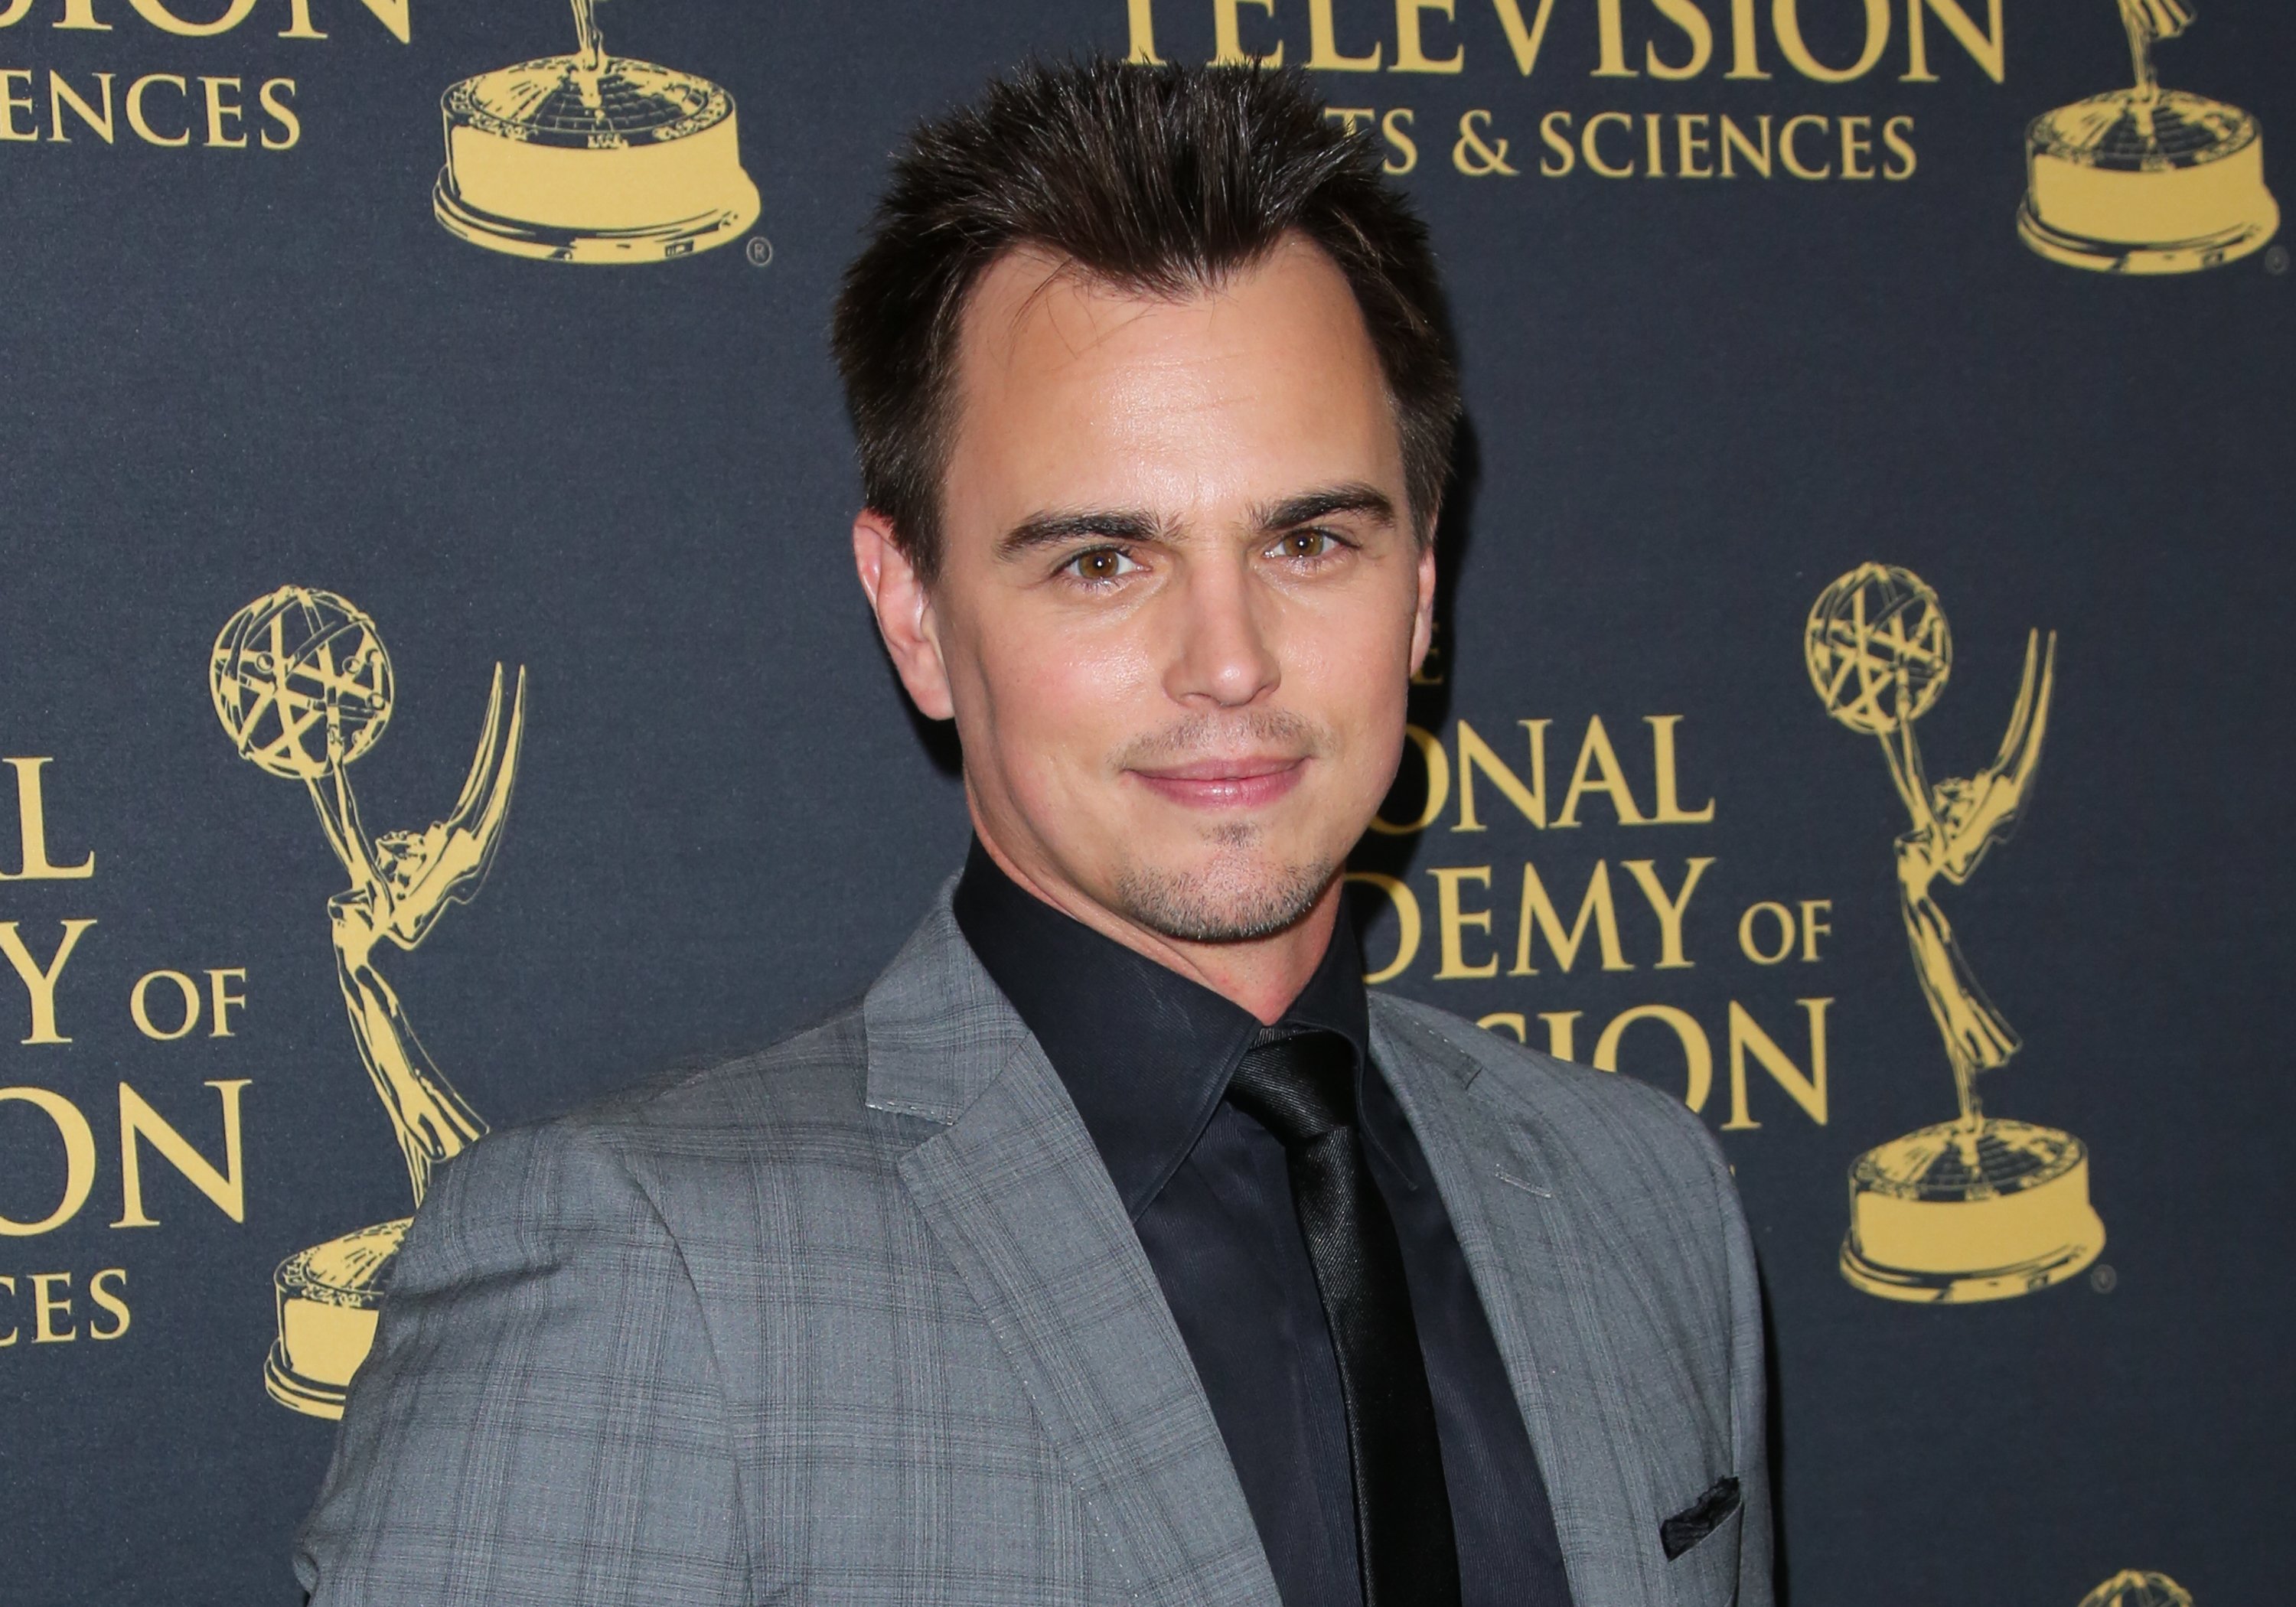 'The Bold and the Beautiful' actor Darin Brooks dressed in a grey suit, poses on the red carpet at the 2015 Daytime Creative Arts Emmys.